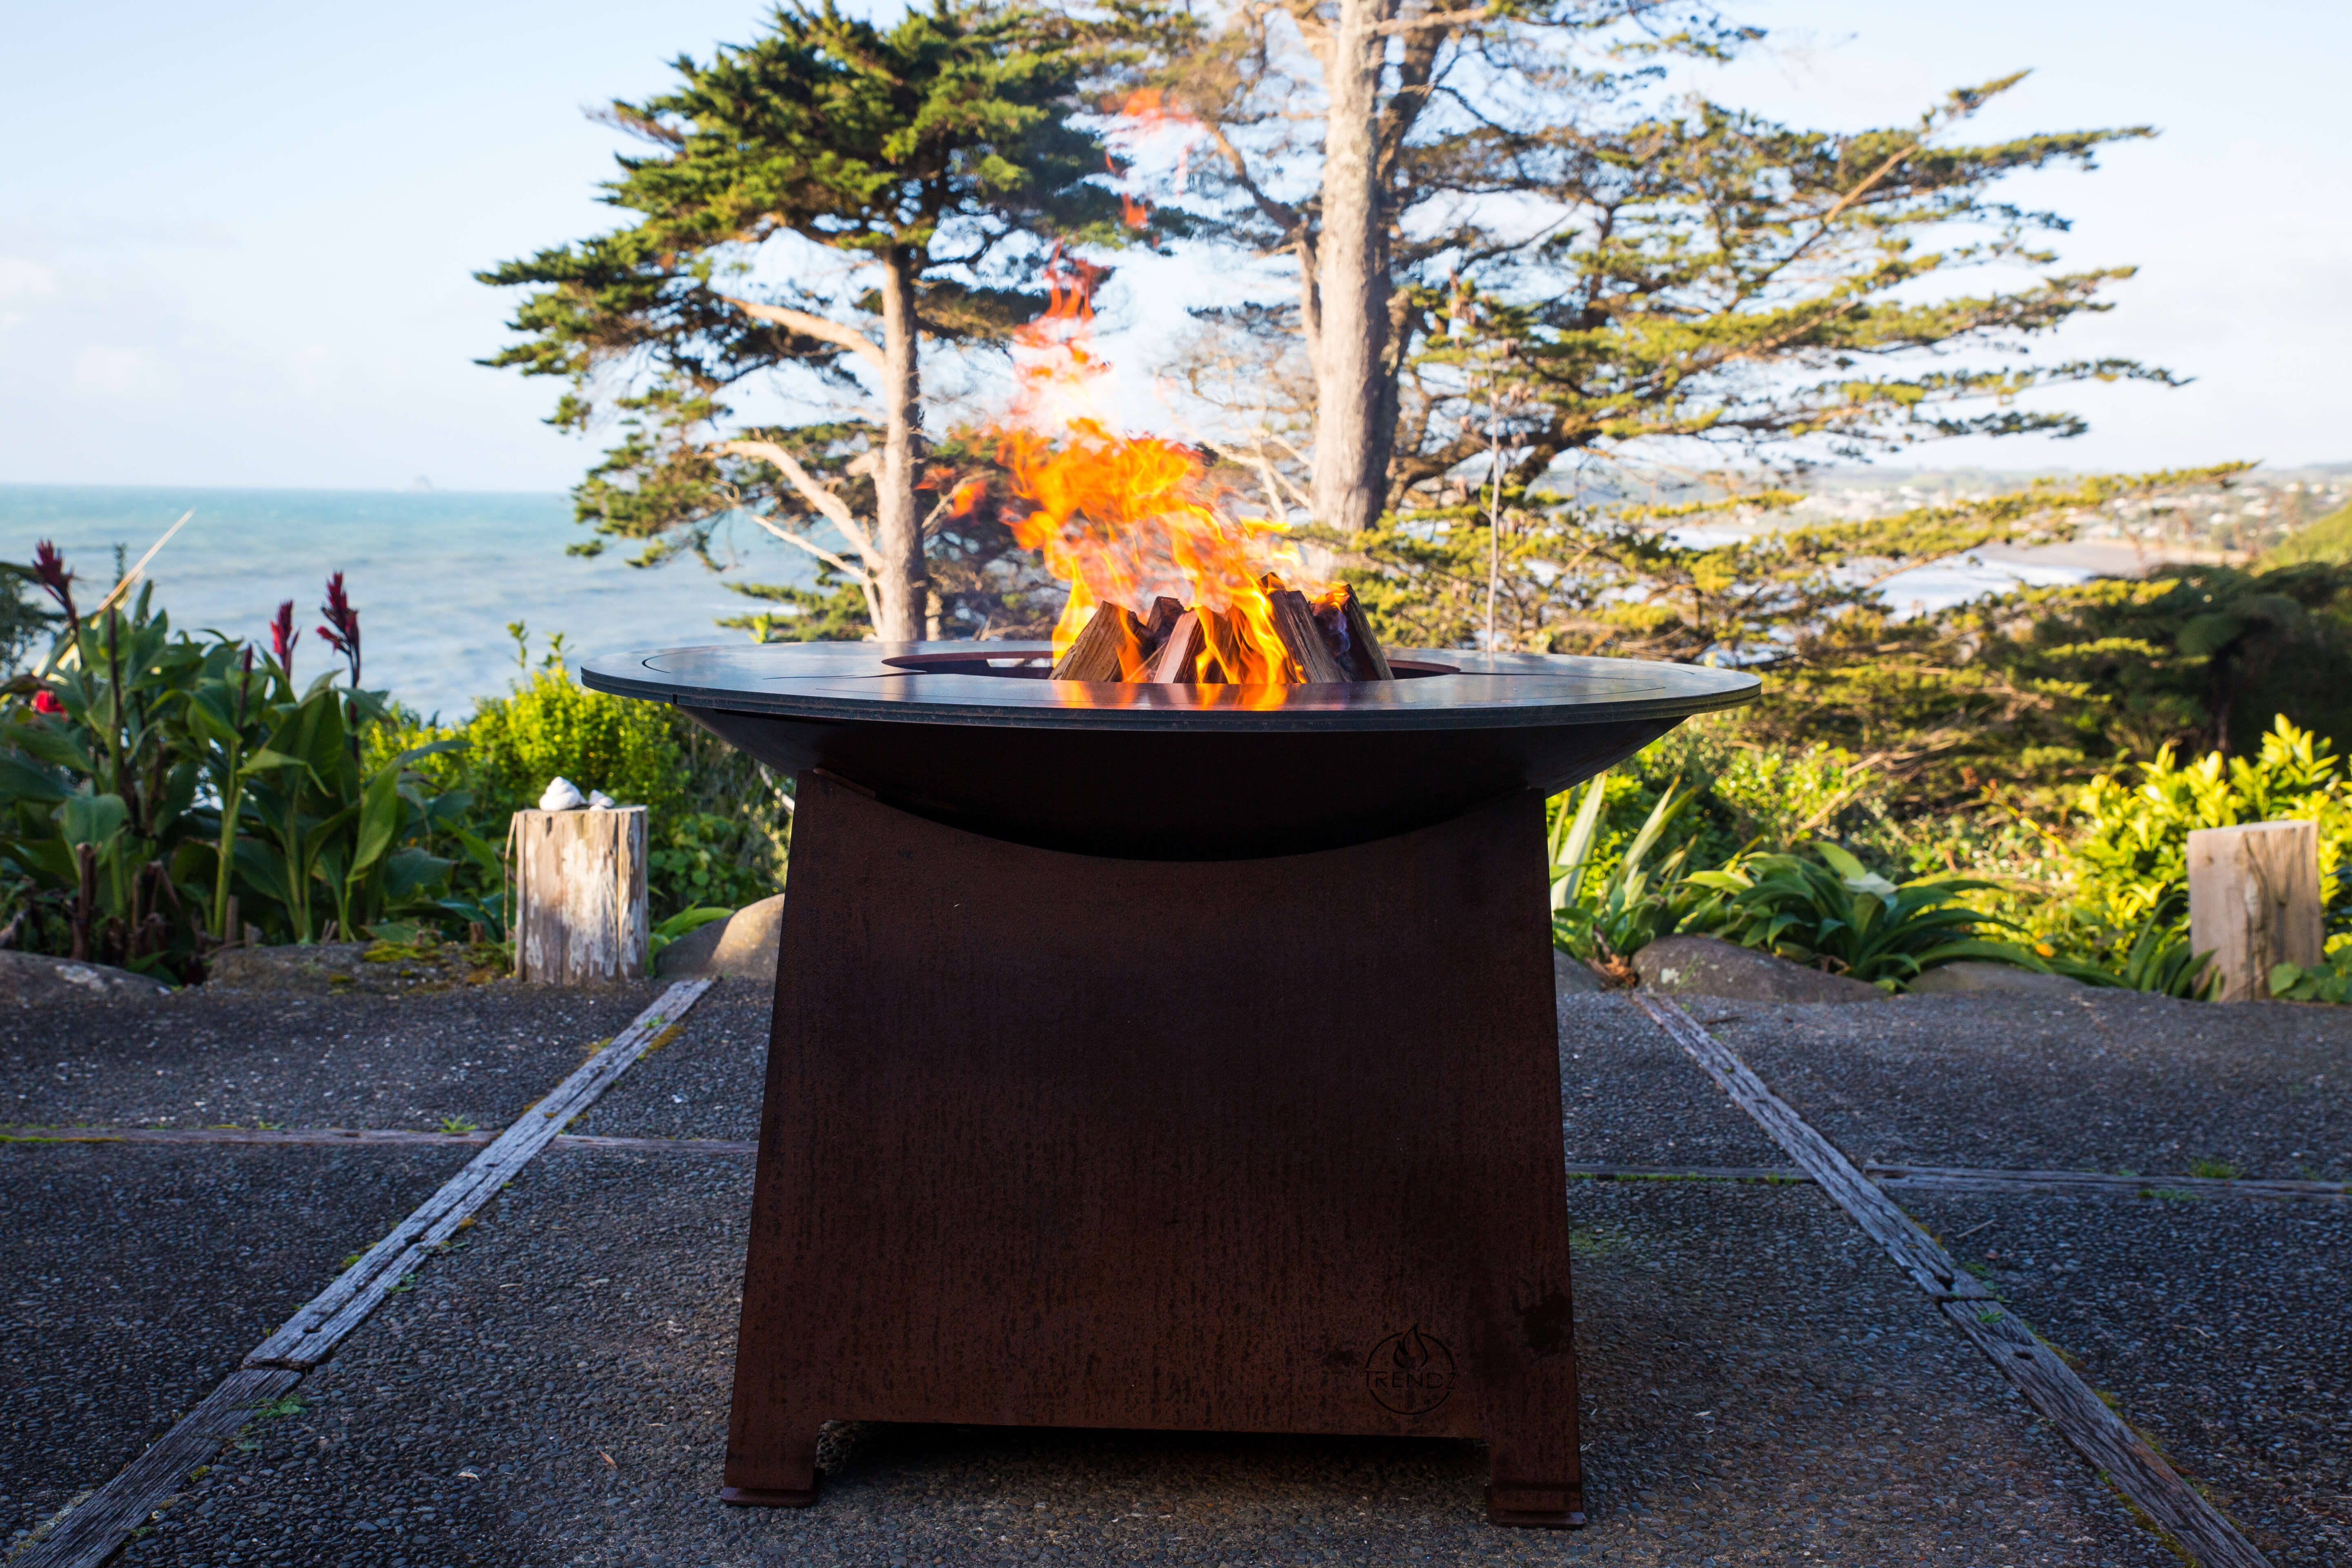 Choosing the right fire pit